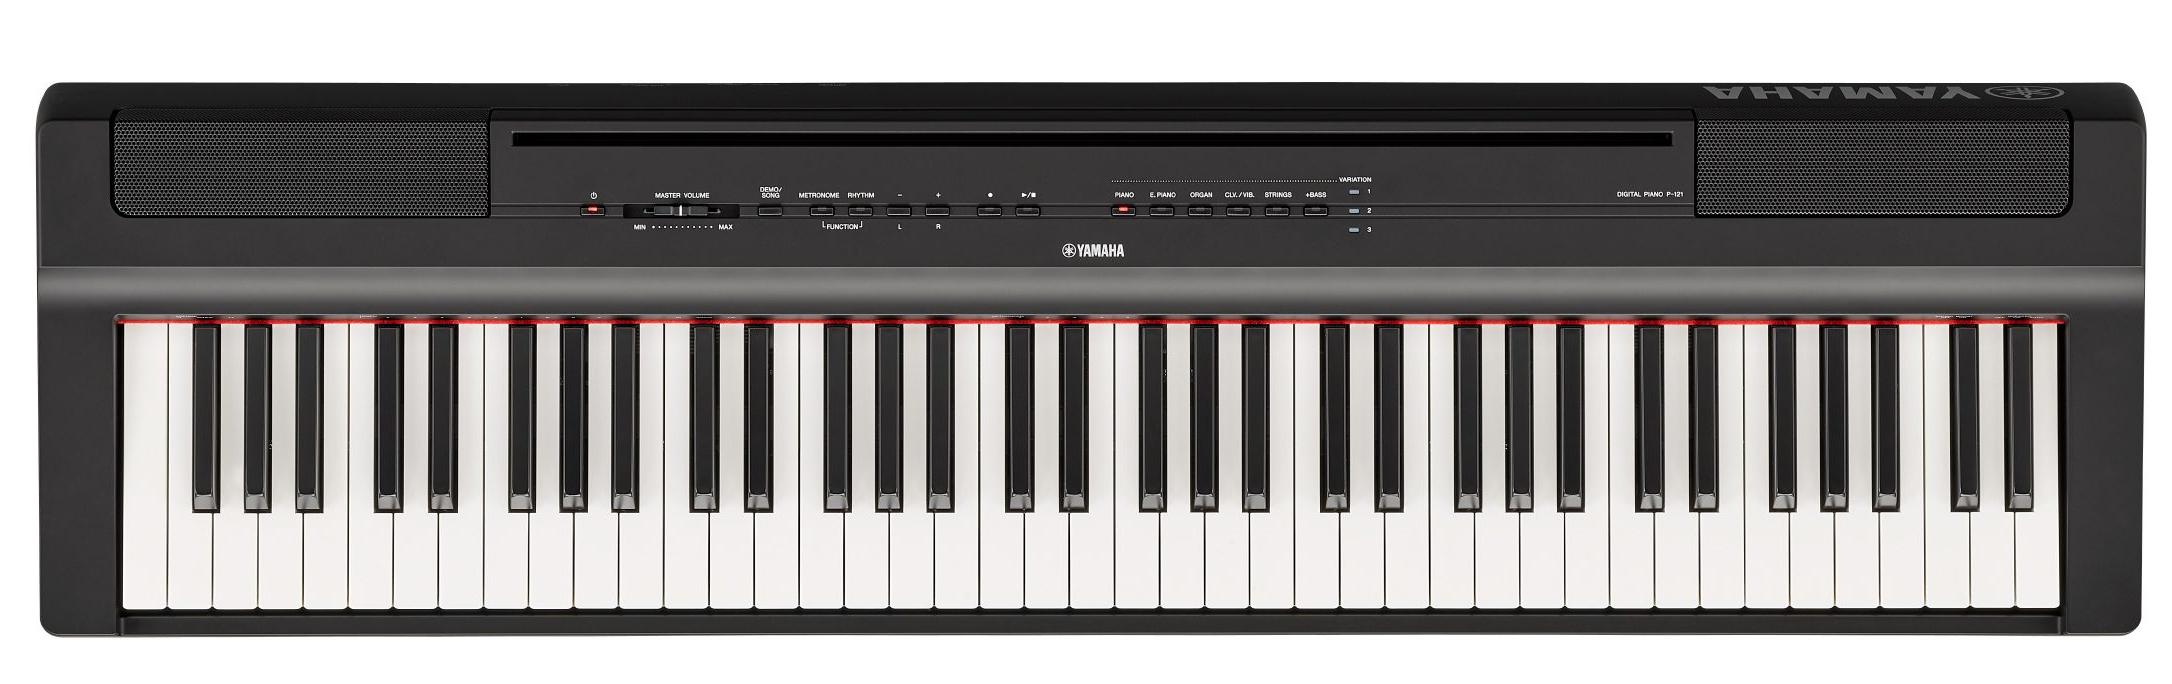 Yamaha P121 73 Key Digital Piano With Graded Hammer Standard Action Full Compass Systems